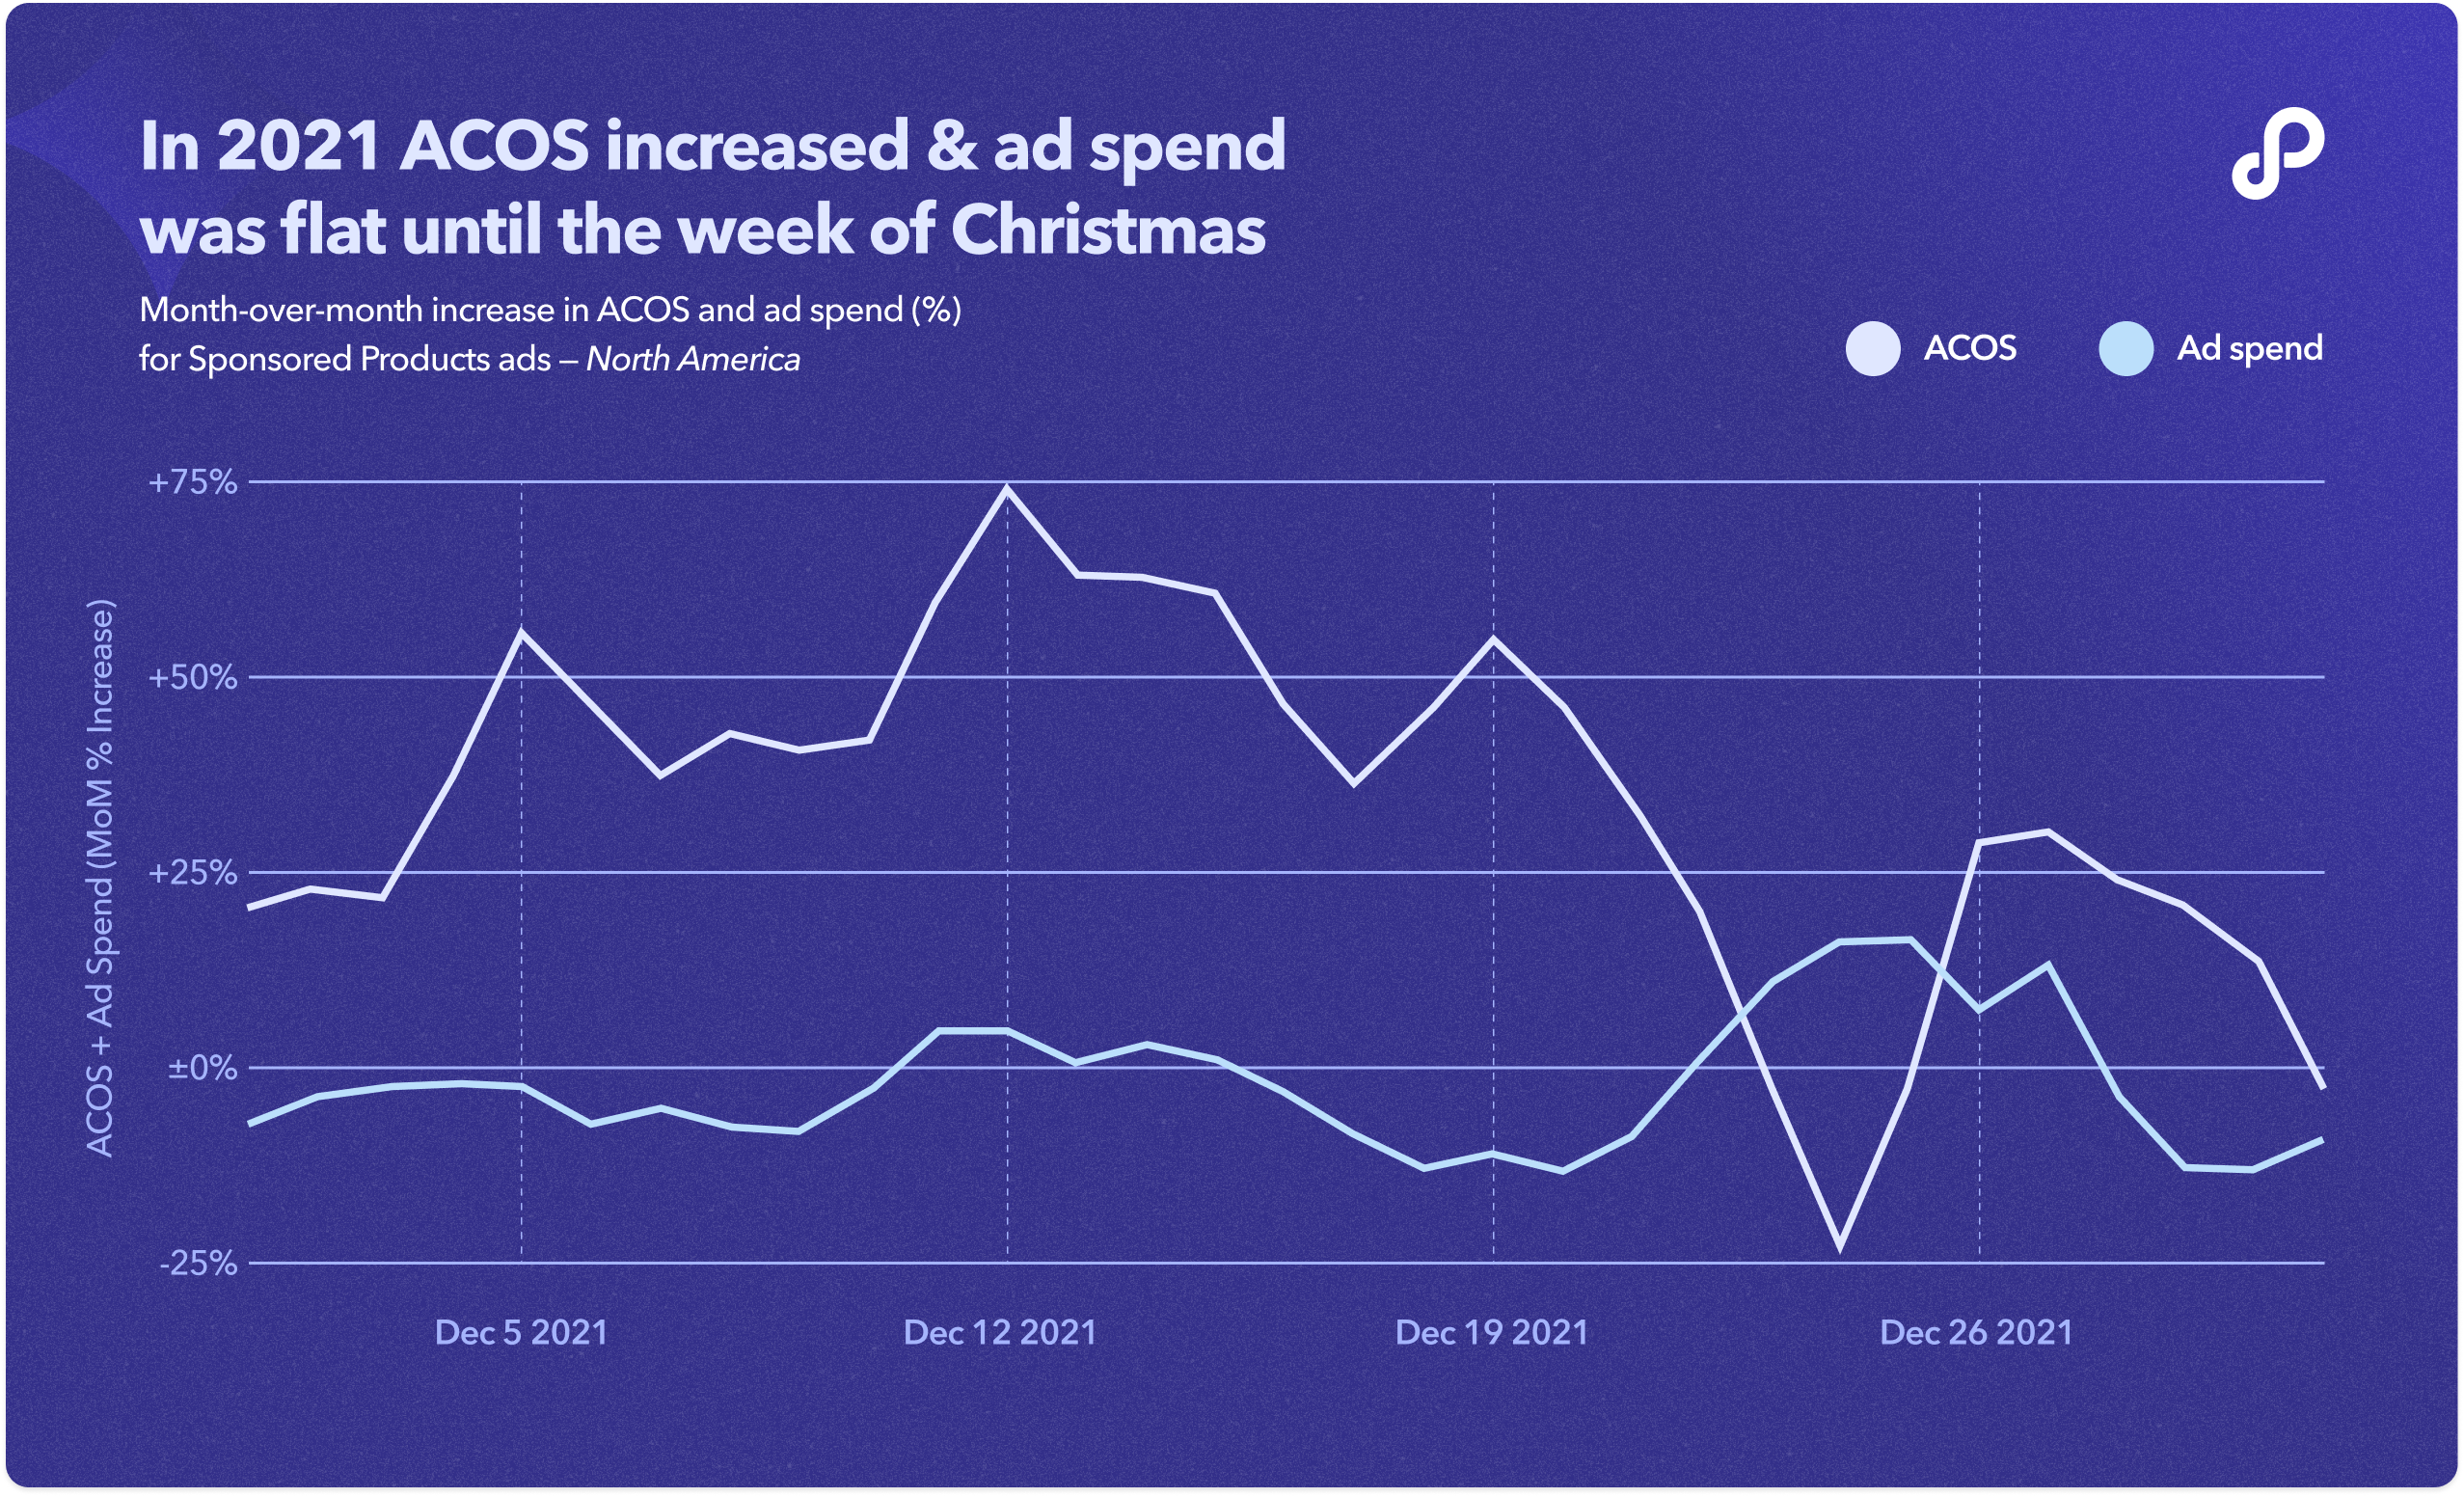 ACOS and ad spend remained high in December 2021